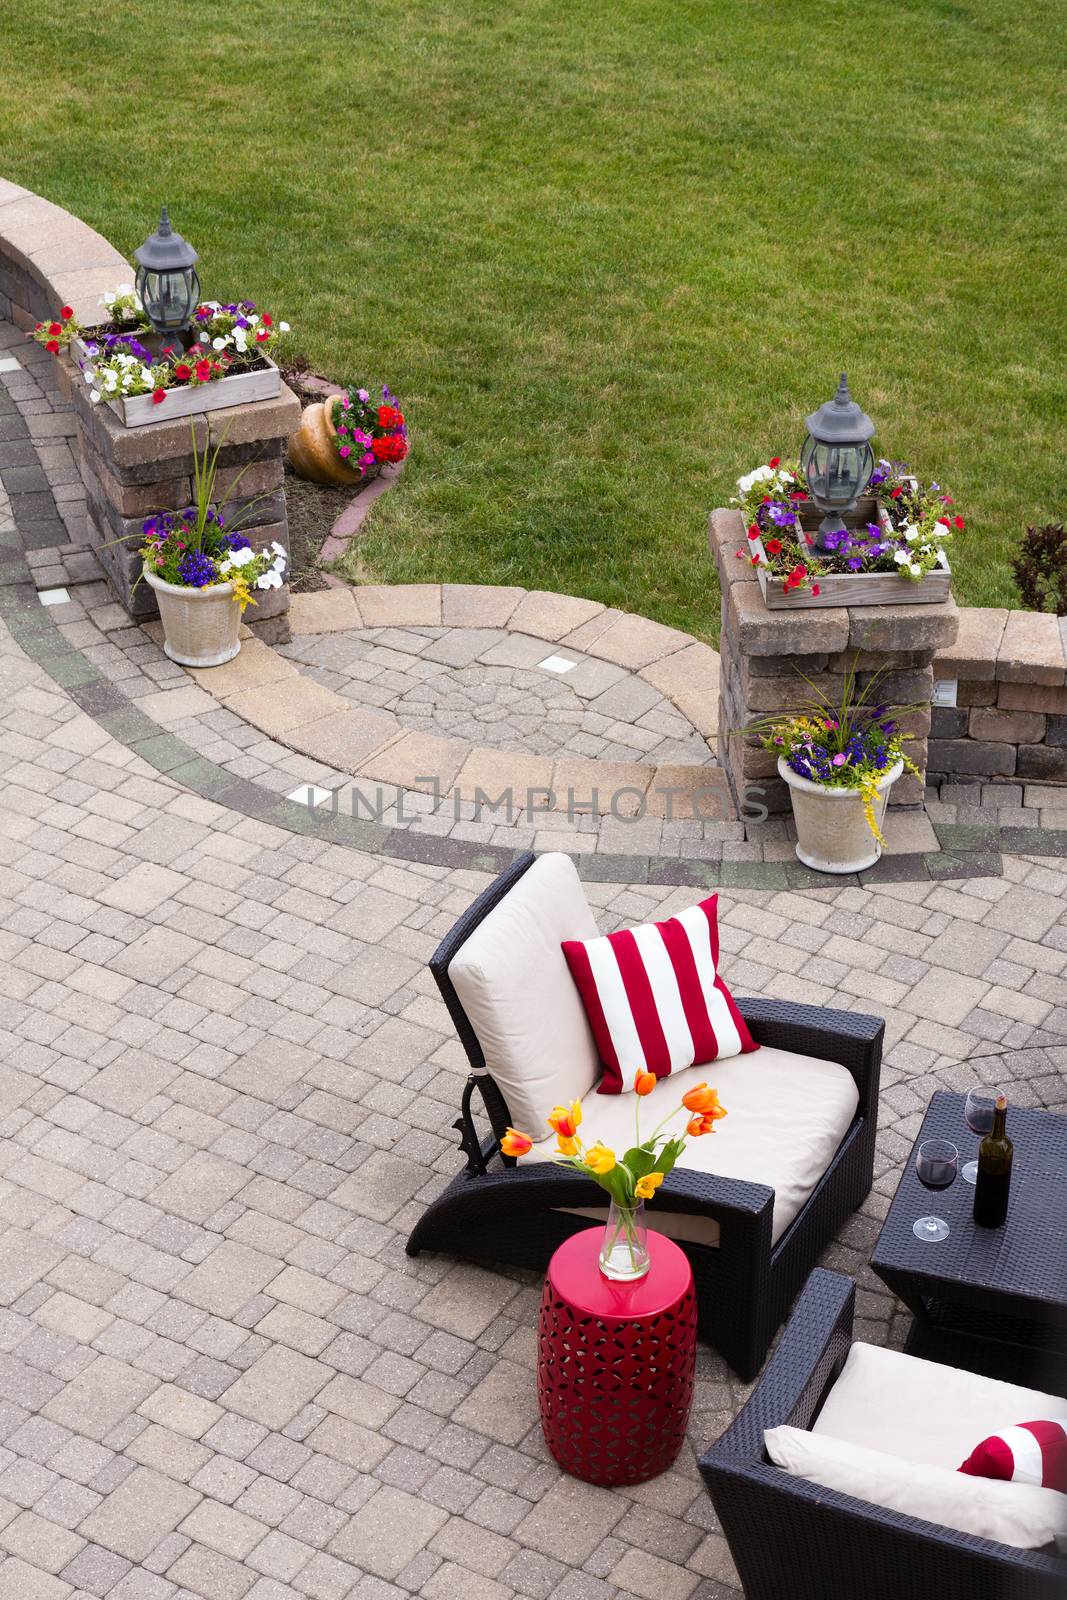 High Angle View of Luxury Patio with Outdoor Living Room Furniture and Stone Pillars Decorated with Colorful Flowers - Red Wine Served near Comfortable Chairs with Striped Cushions on Stone Patio